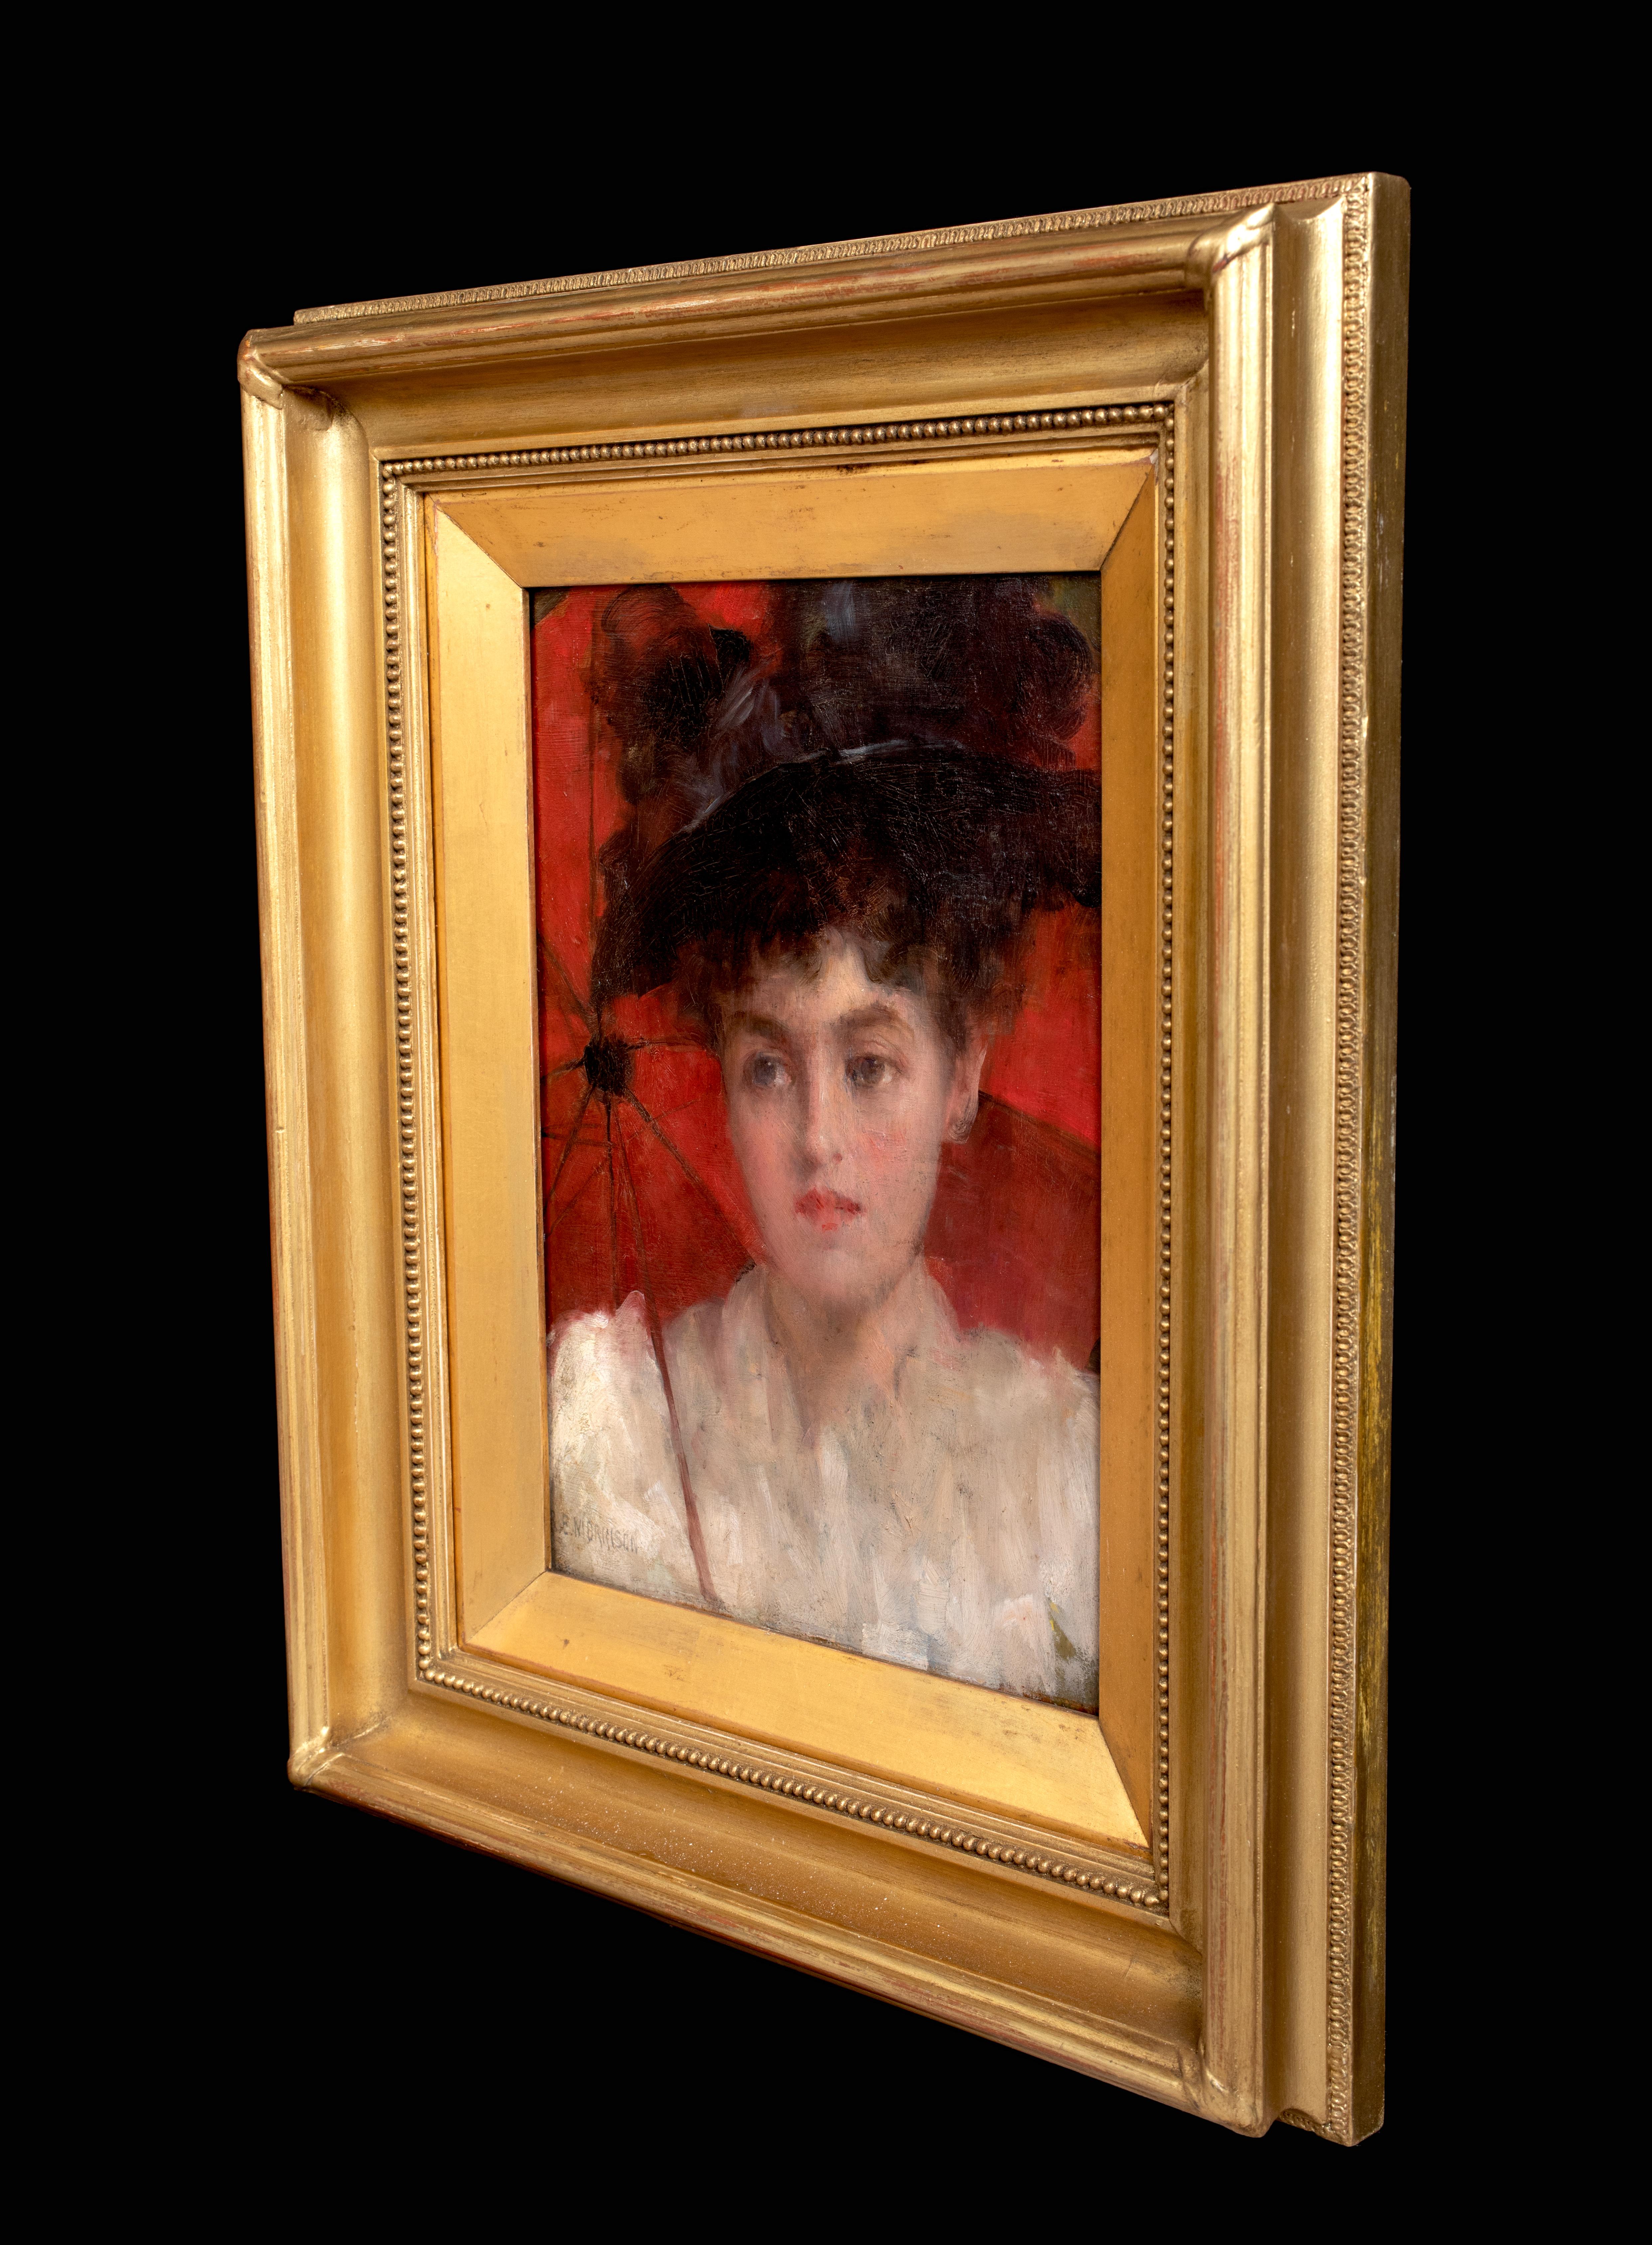 Portrait Of A Lady With A Red Parasol, circa 1900  by Robert Edward MORRISON  For Sale 6